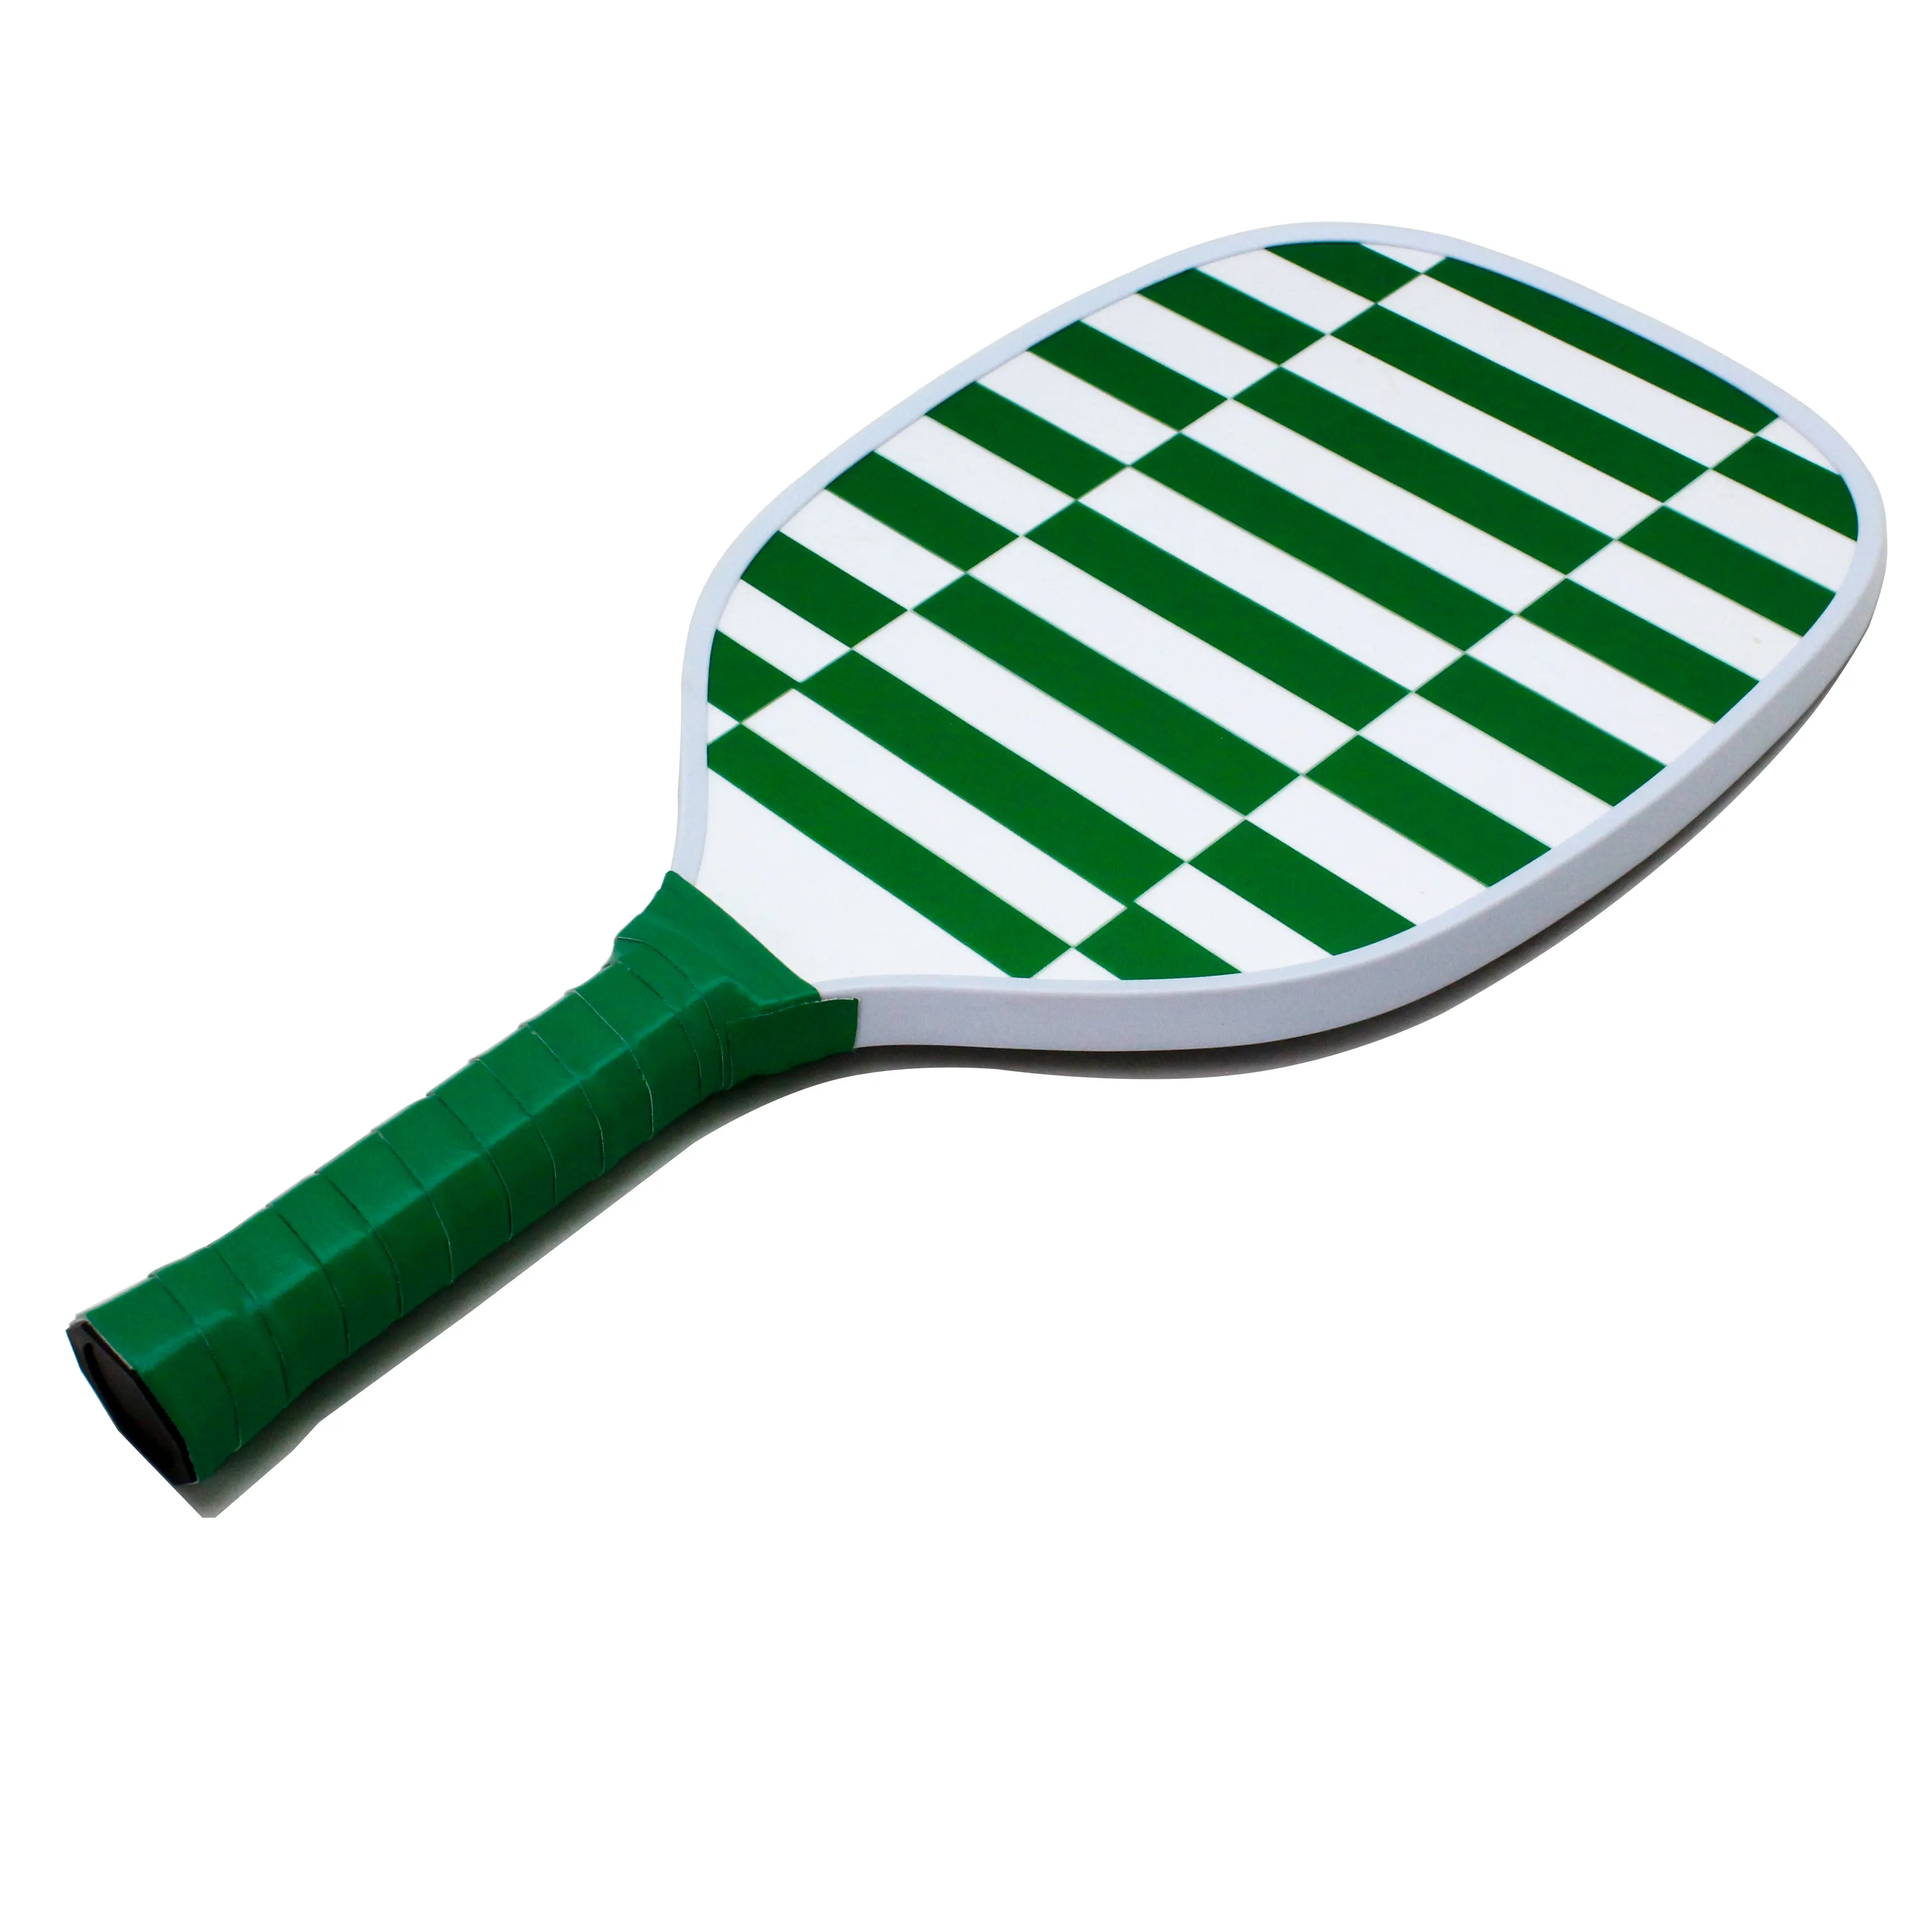 Wooden Pickleball Set with 2 Paddles 4 Balls Carry Bag Pickleball Rackets Wholesale Pickleball Paddle